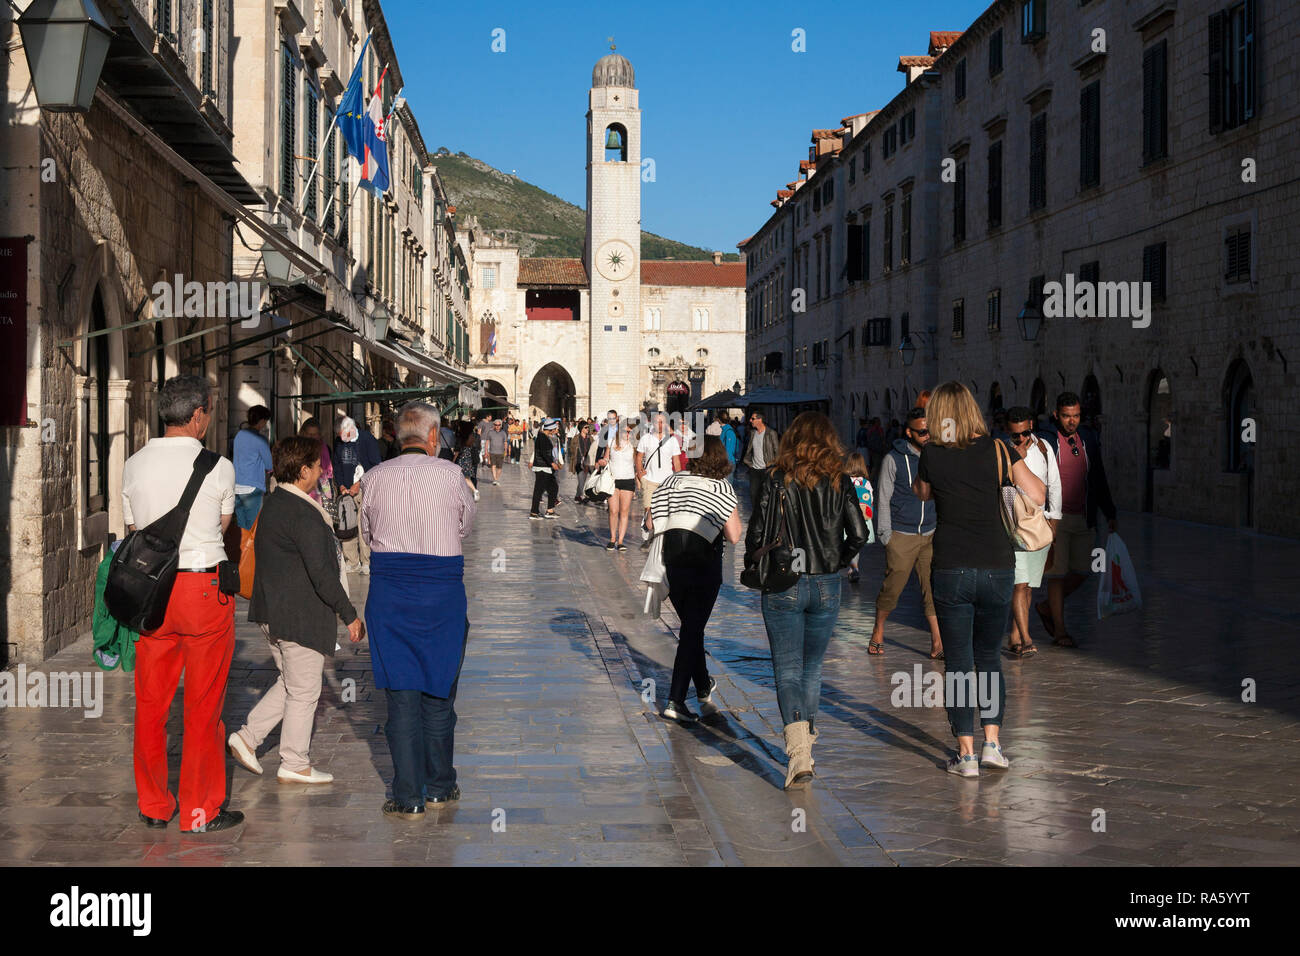 Tourists and visitors throng to every nook and cranny of the winding back streets  and alleys of the old town of Dubrovnik, Croatia. Stock Photo